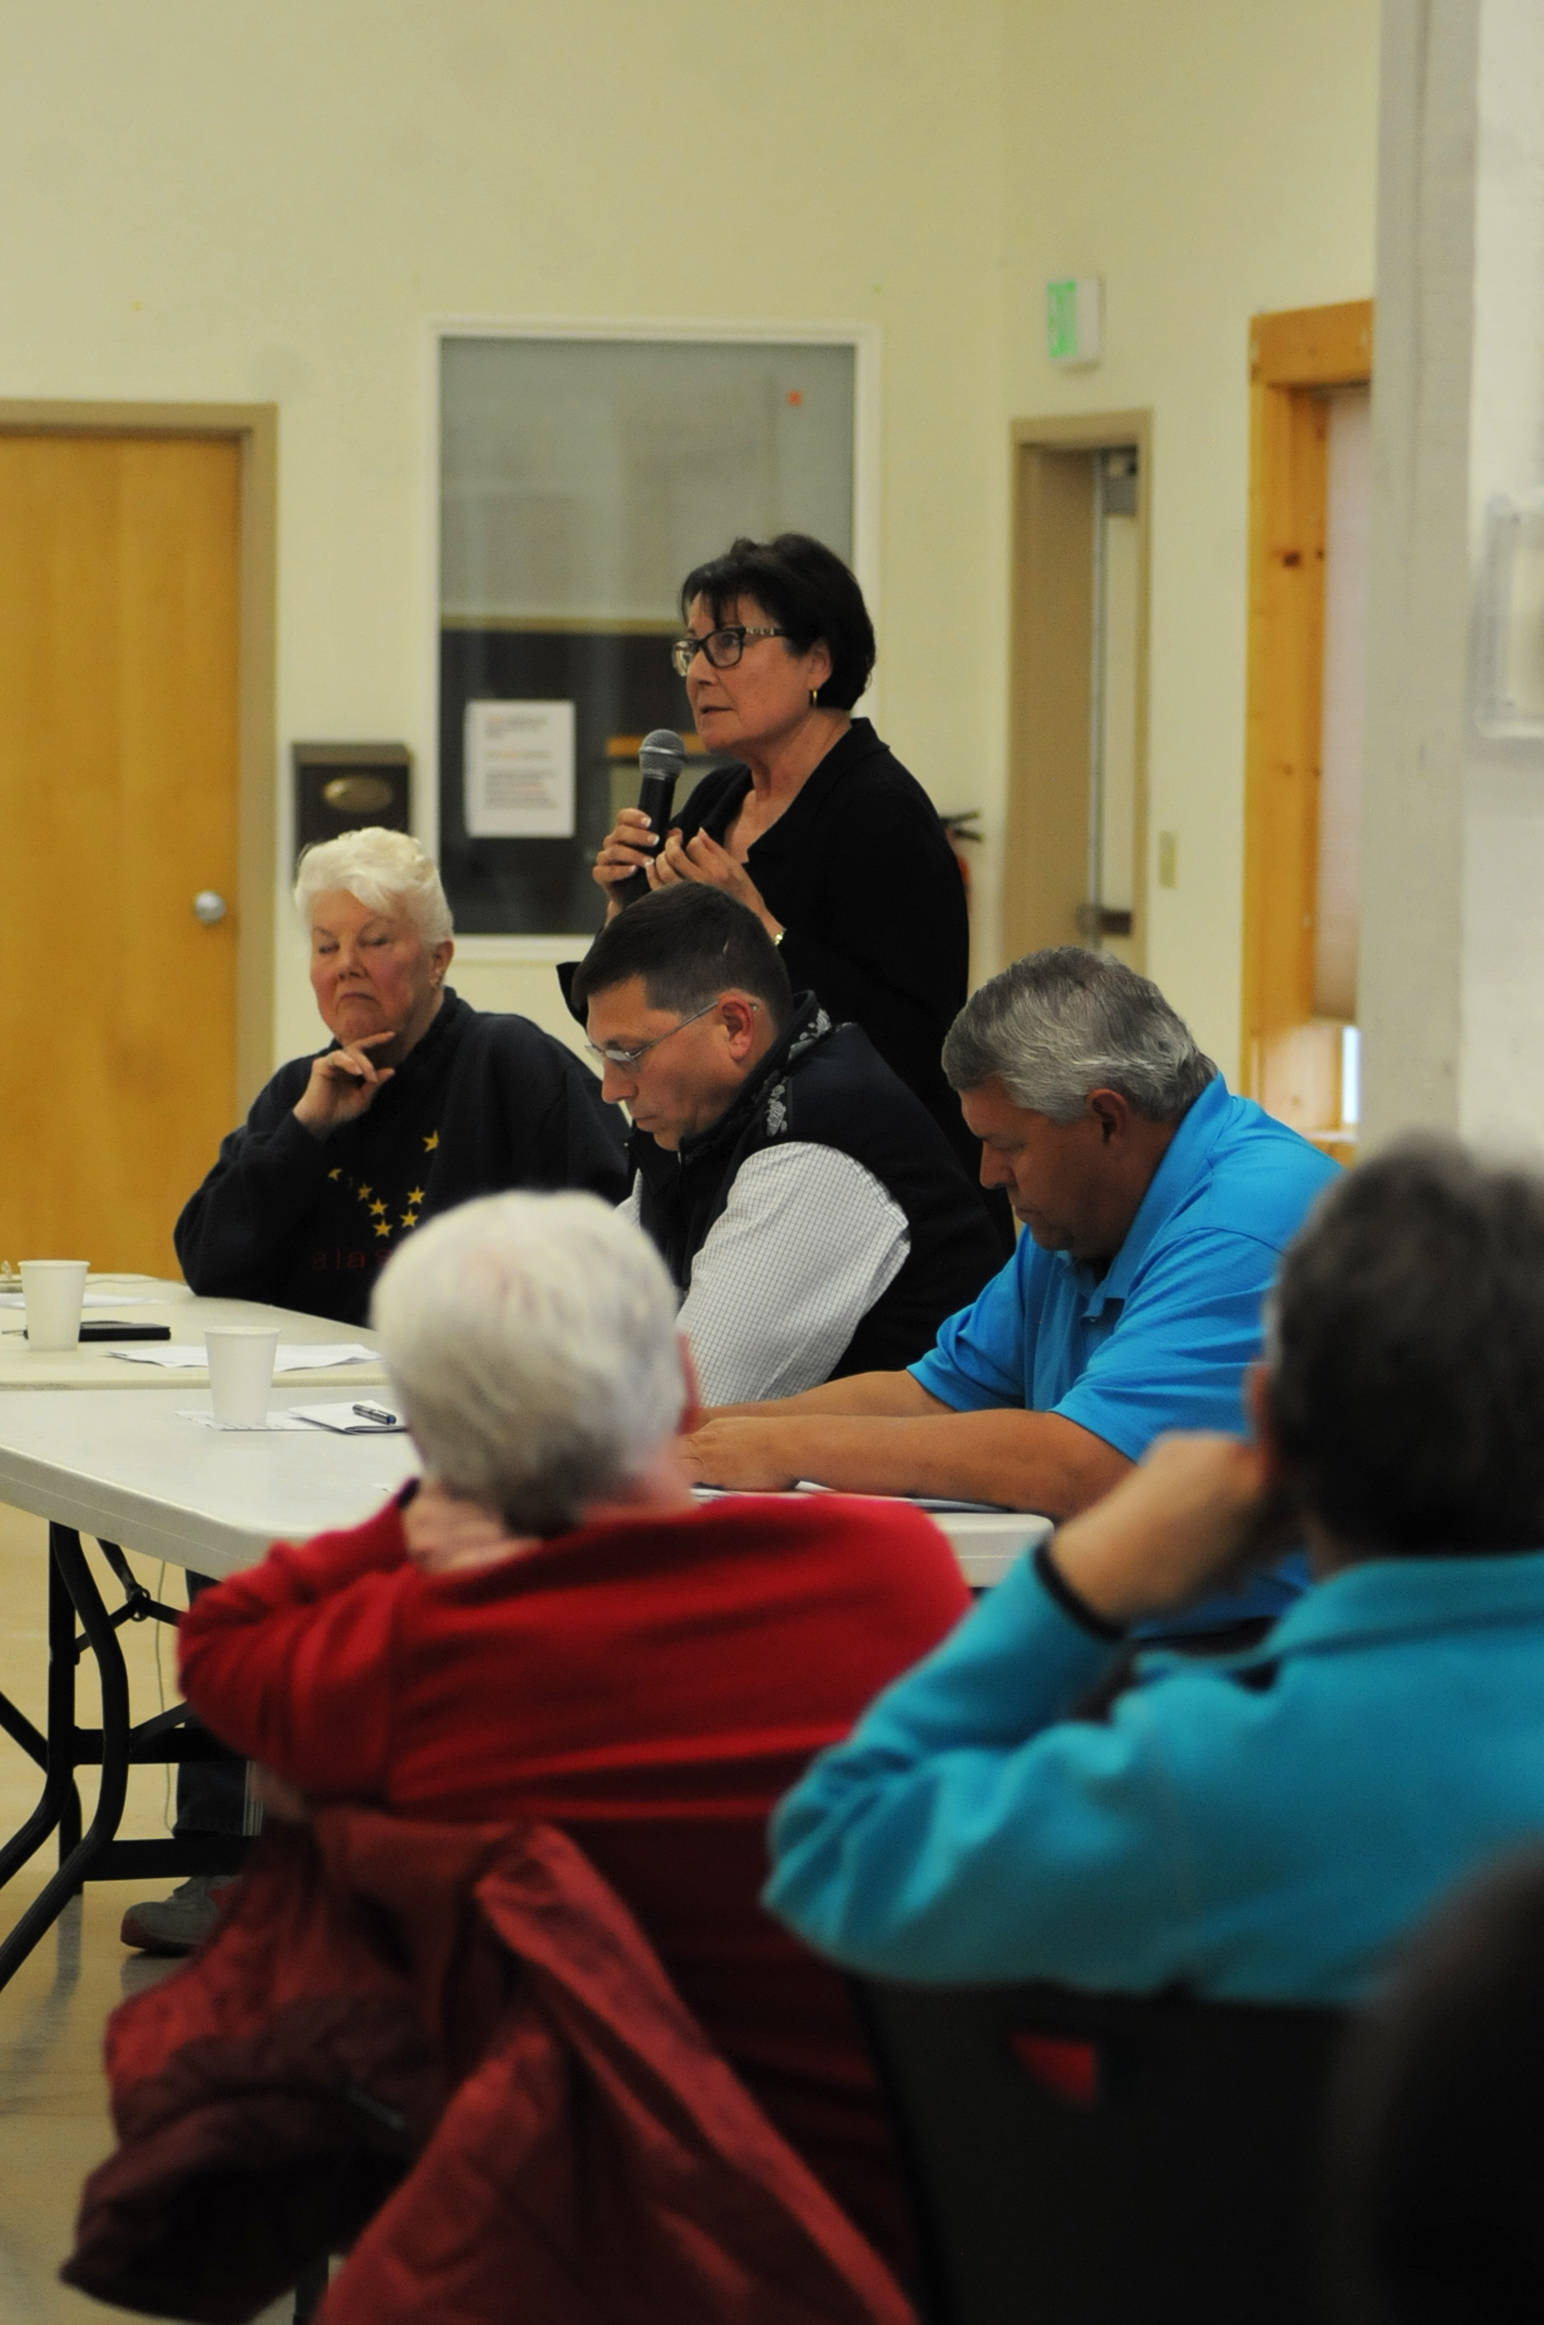 Linda Hutchings (second from left), a candidate for Kenai Peninsula Borough Mayor, answers a question during a forum with fellow candidates Dale Bagley (center) and Charlie Pierce (right) at the Funny River Community Center on Thursday, Aug. 16, 2017 in Funny River, Alaska. (Photo by Elizabeth Earl/Peninsula Clarion)